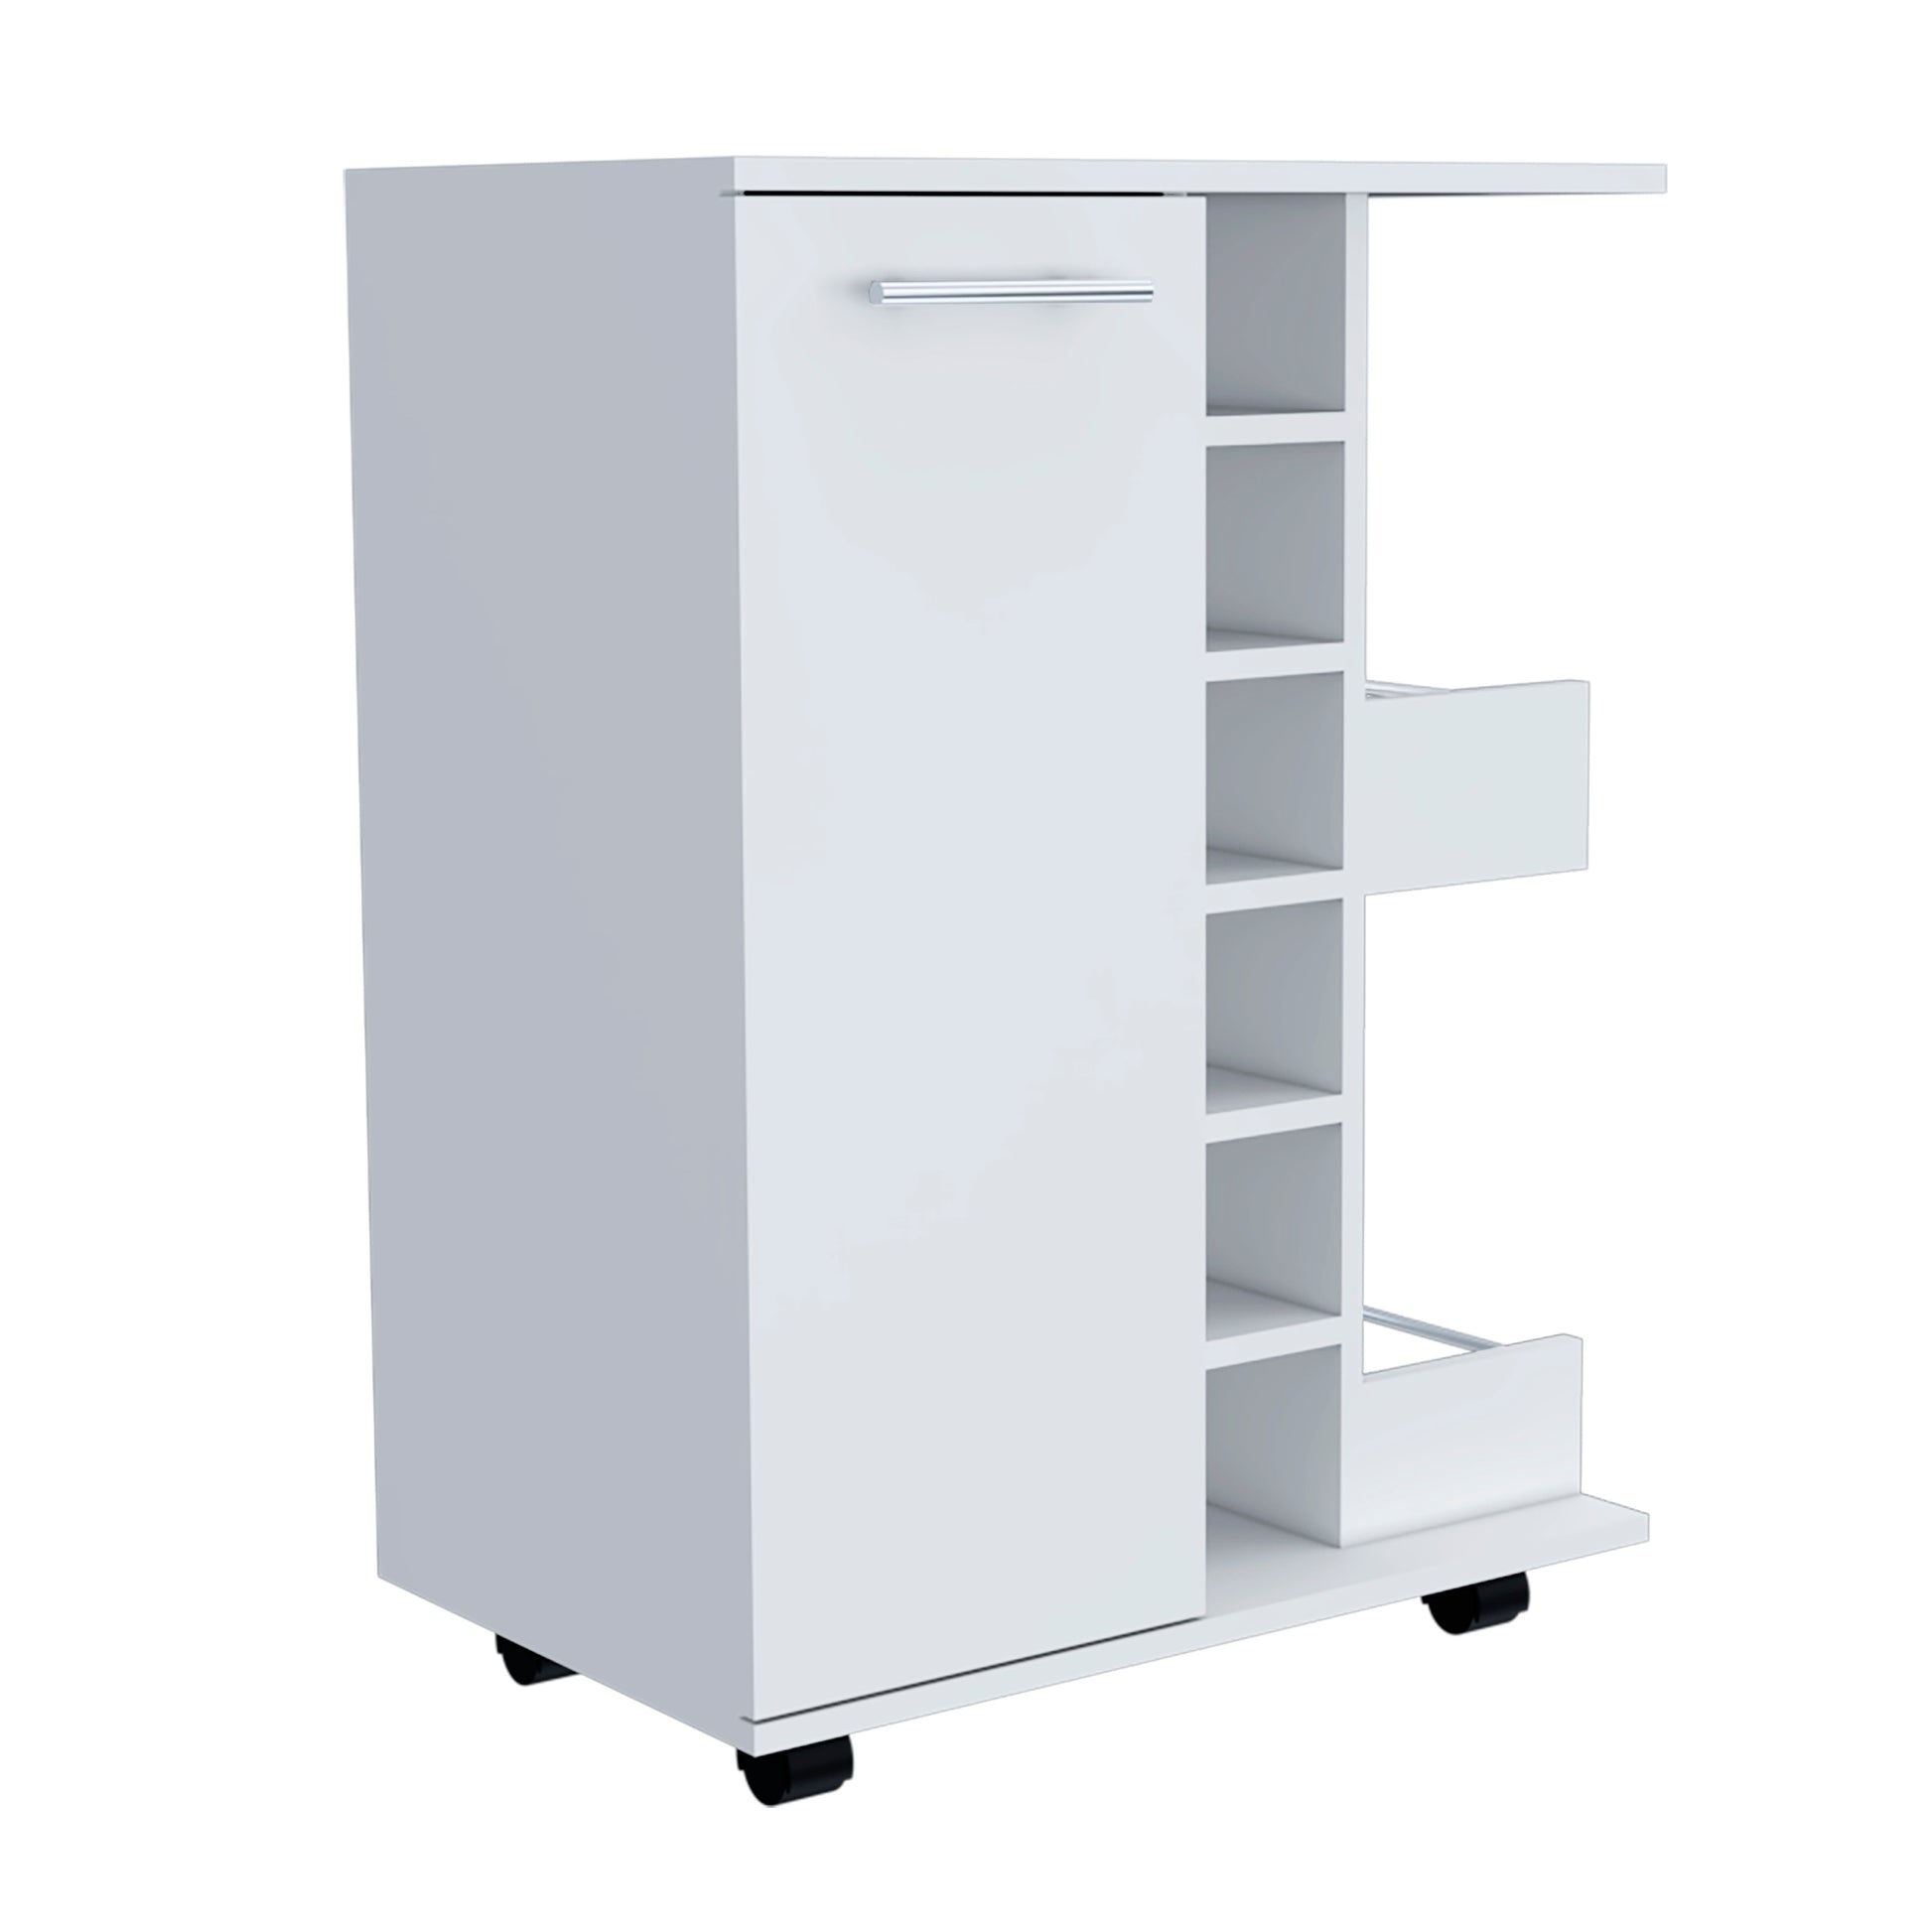 Tennessee Bar Cart, One Cabinet With Division, Six mobile carts-5 or more spaces-white-white-primary